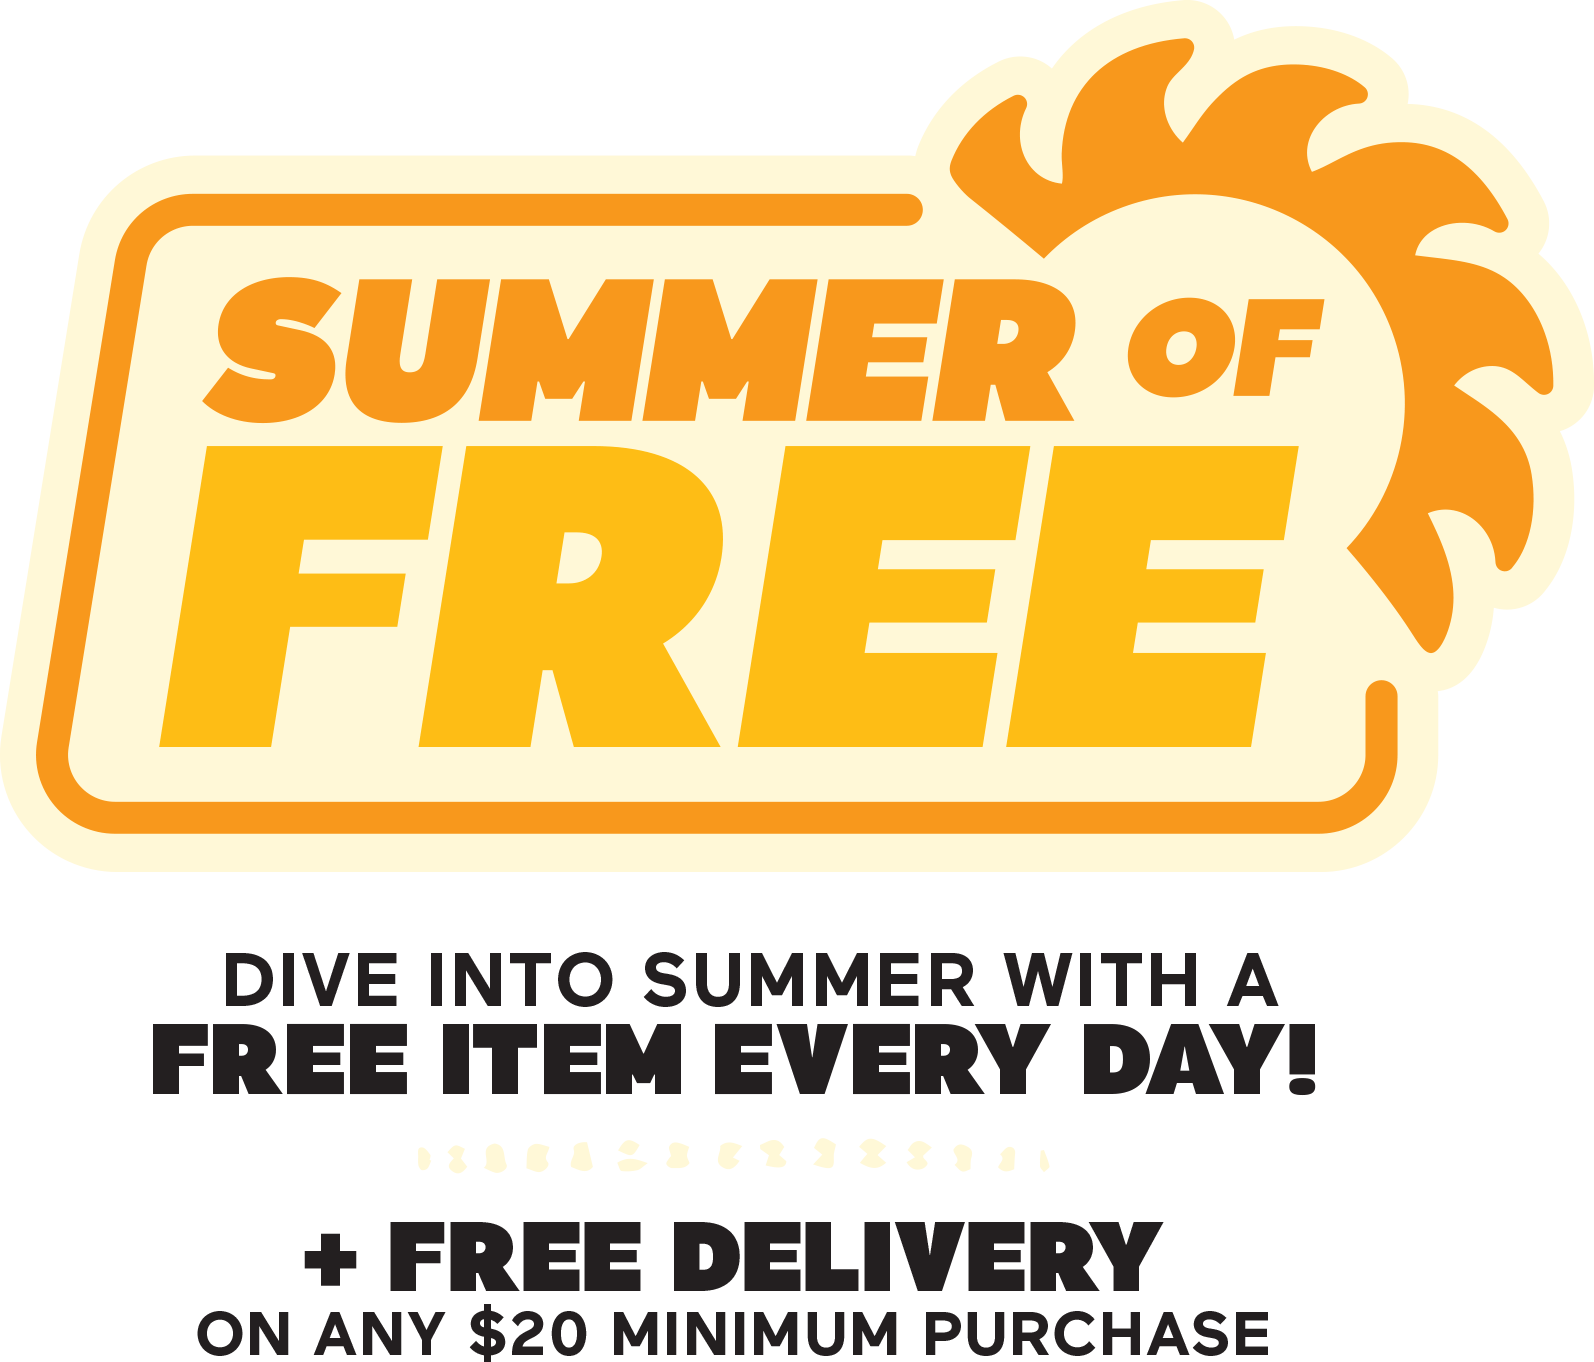 Summer of Free Kick Off Summer With a Free Item Every Day! + Free Delivery on any $20 Minimum Purchase